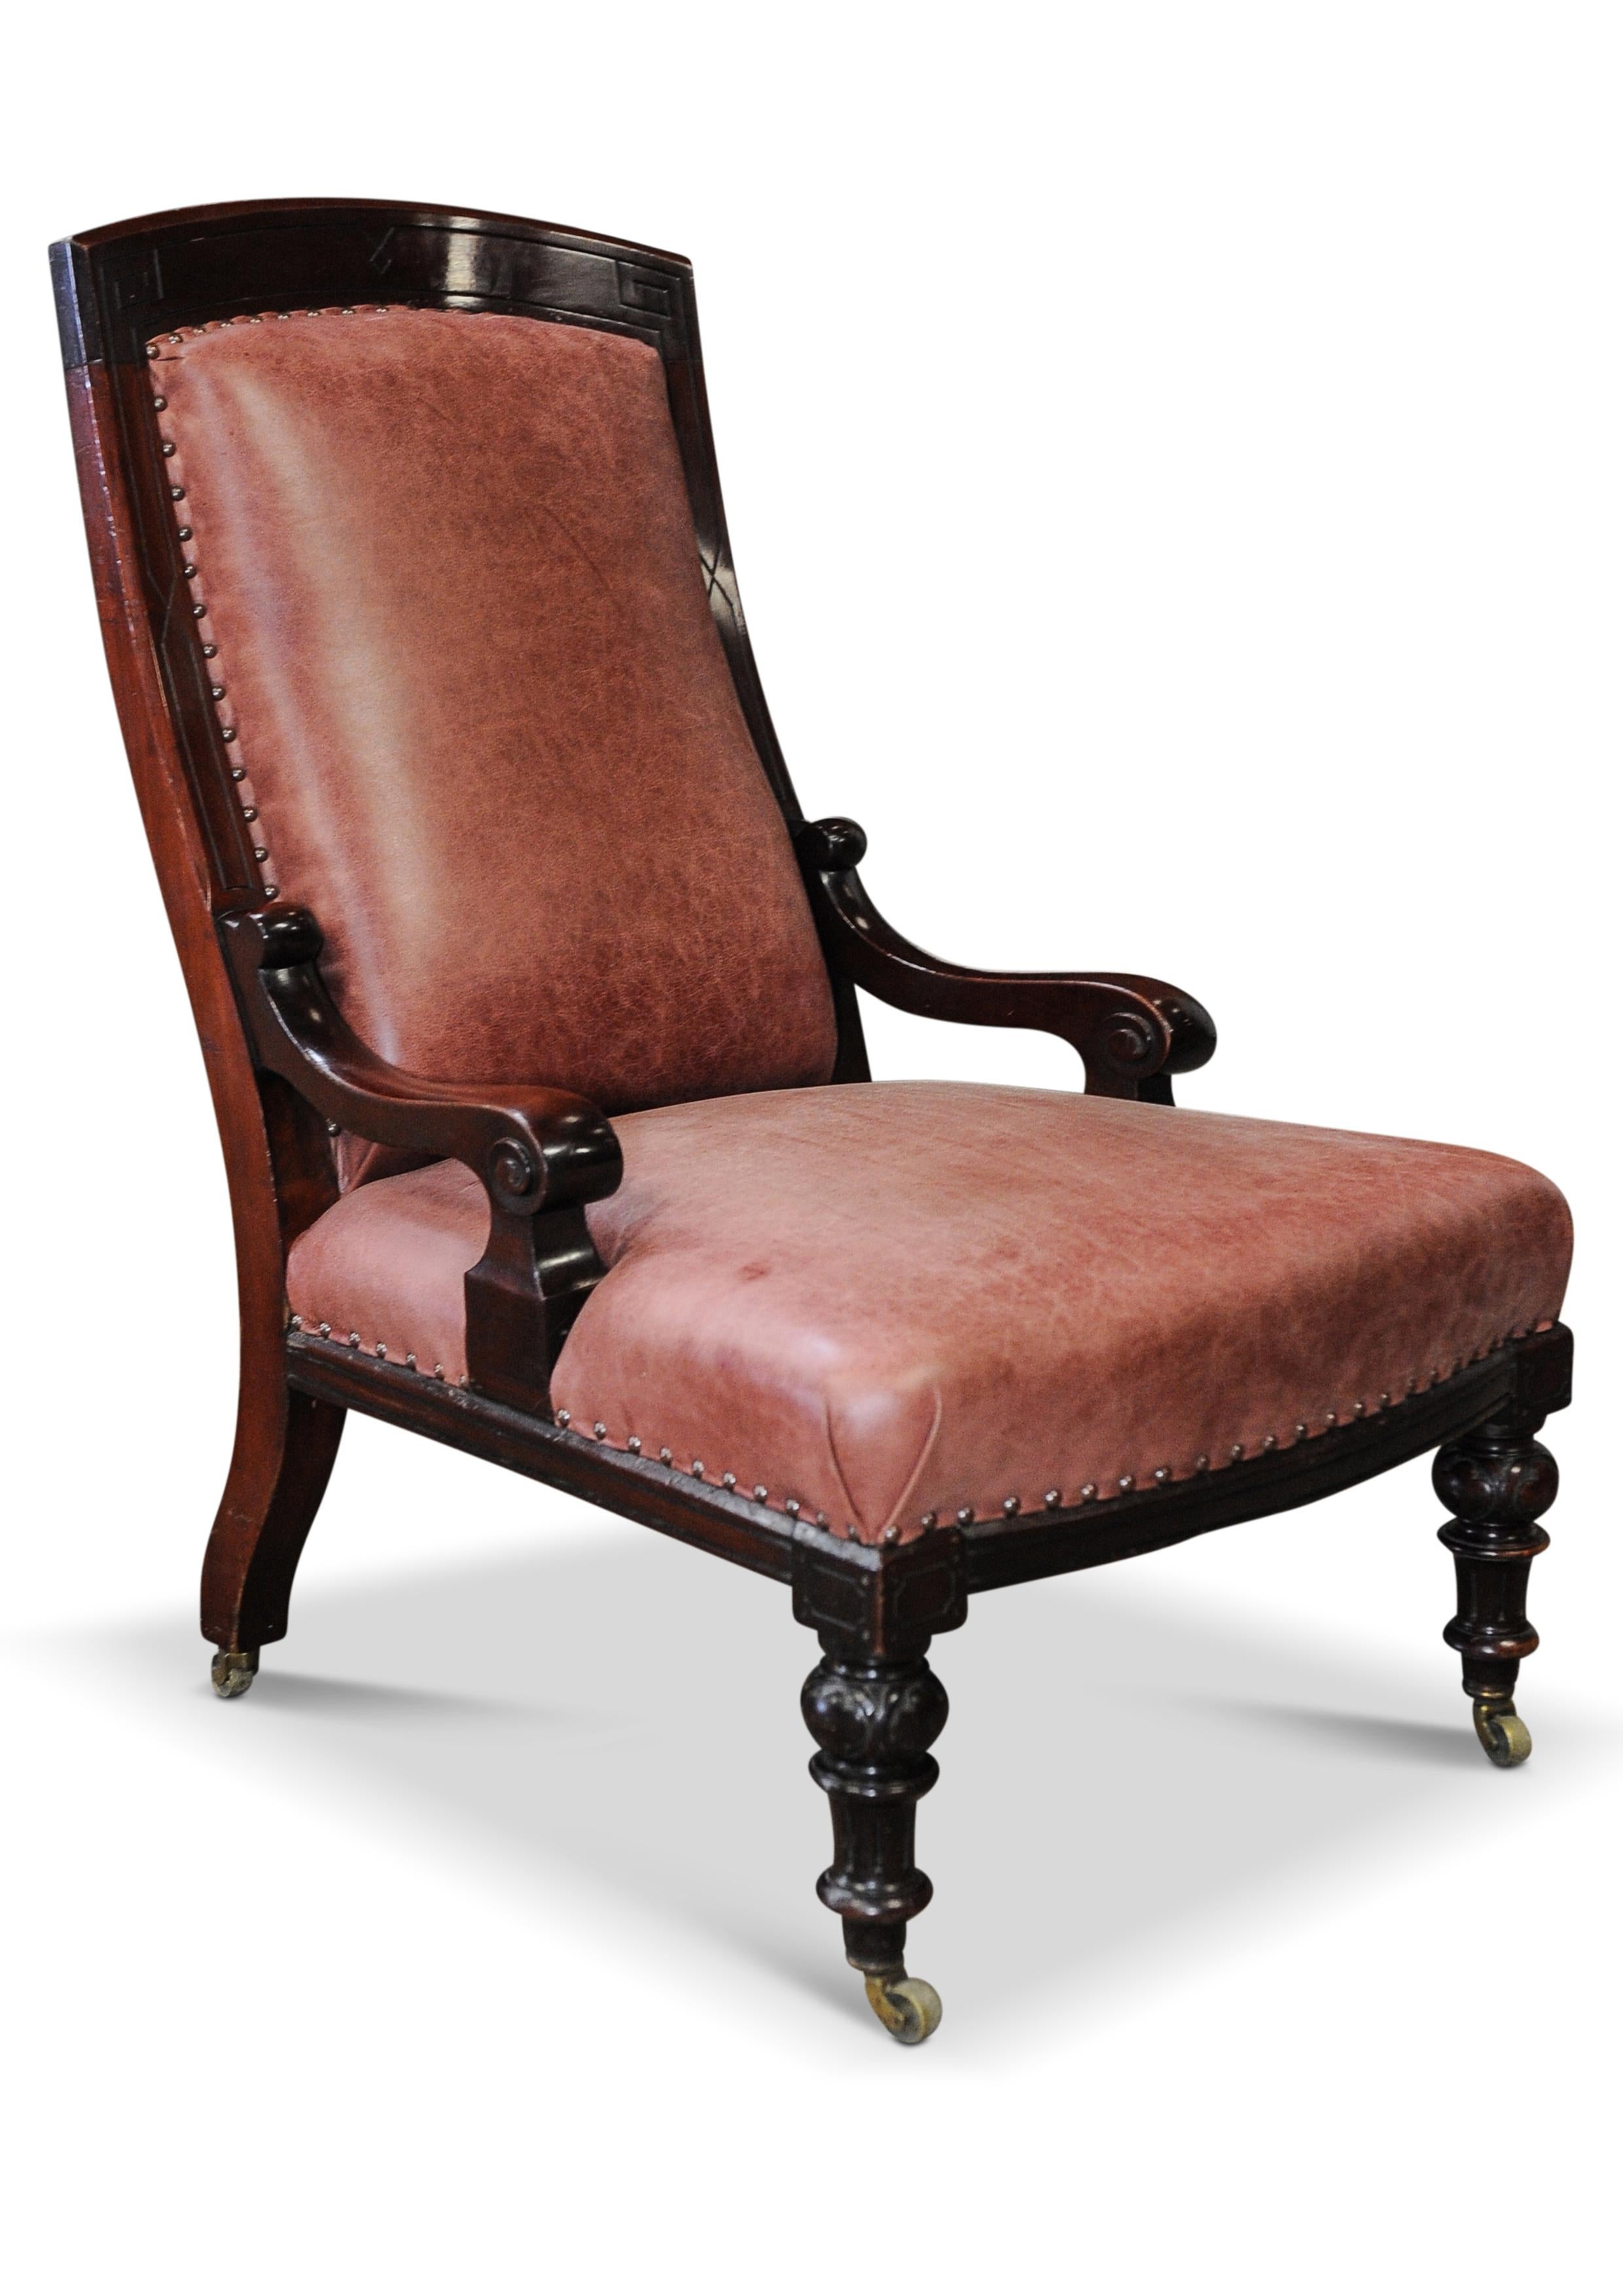 An Elegant William IV Leather & Mahogany Library Chair With Athenian Carved Wood And Brass Studded Detailing Upon Brass Castors 1800's

